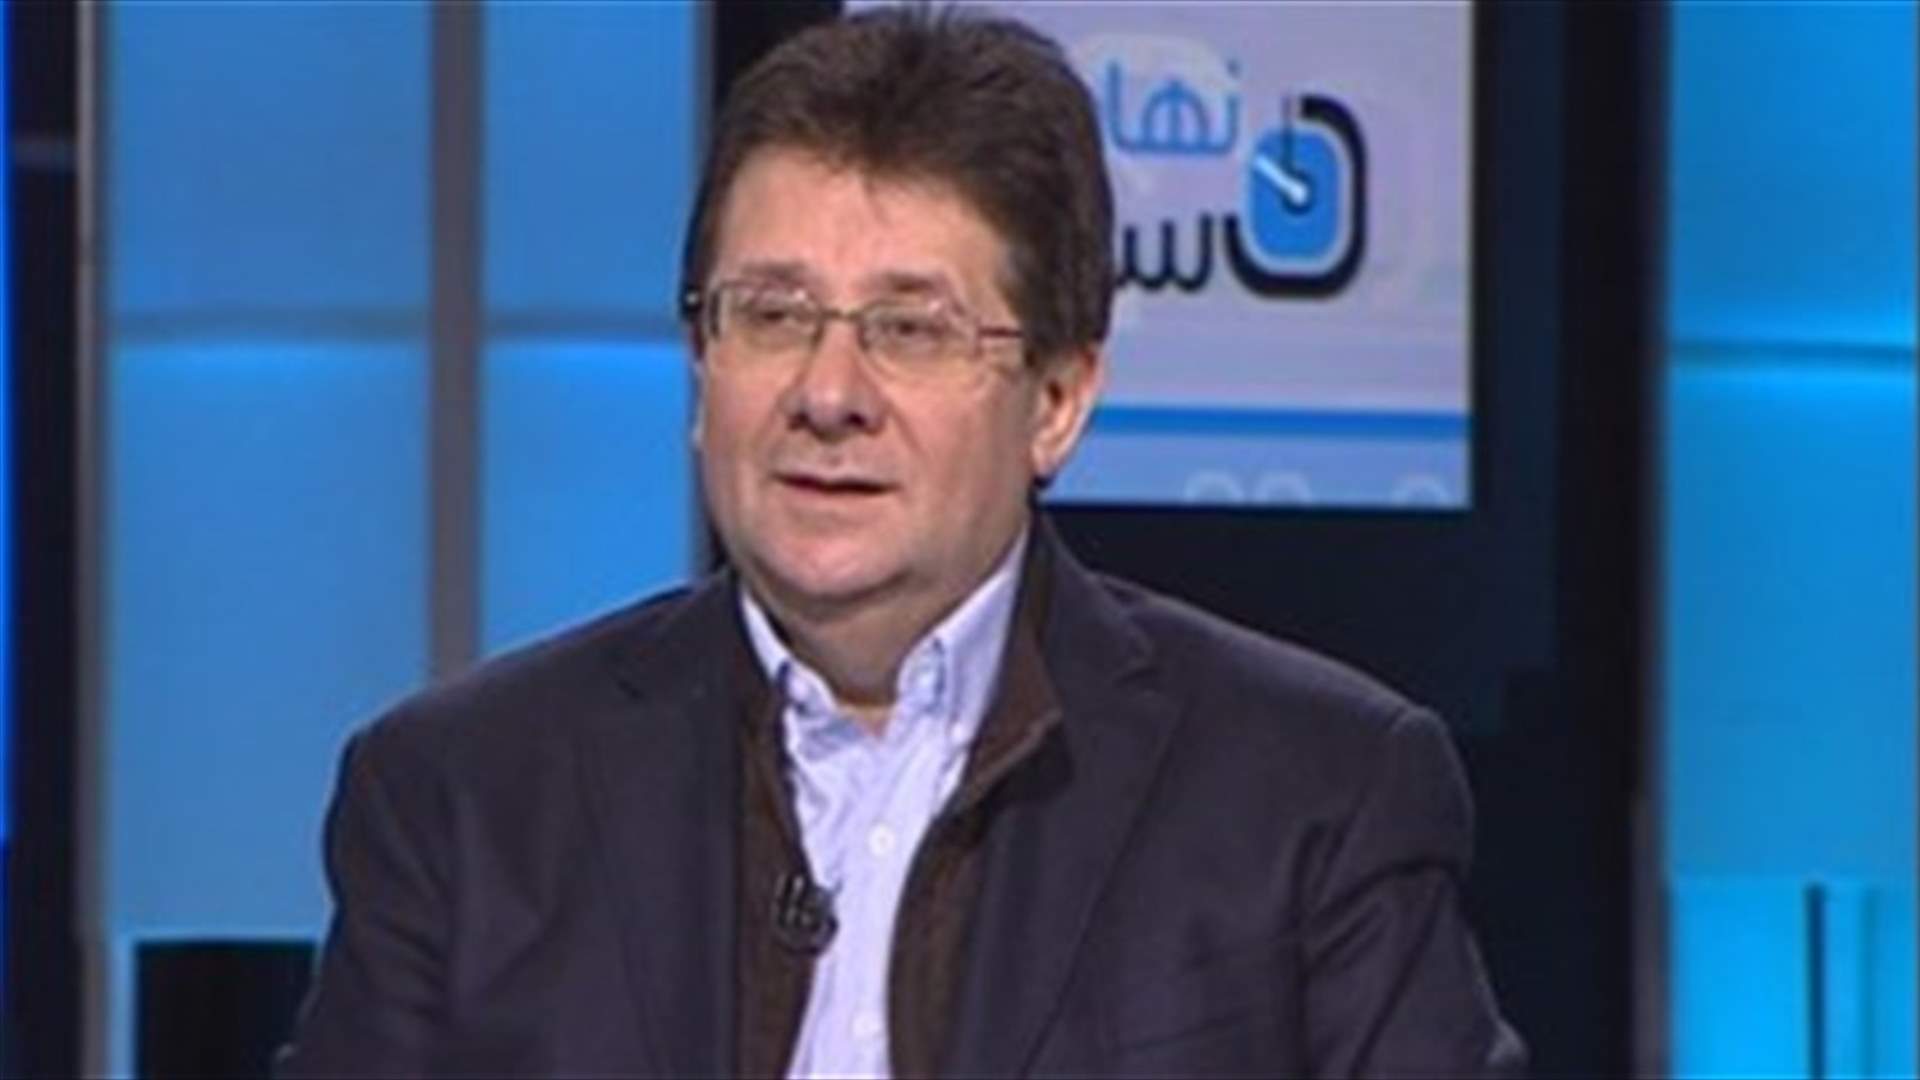 MP Kanaan to LBCI: No files can jeopardize relation between LF and FPM